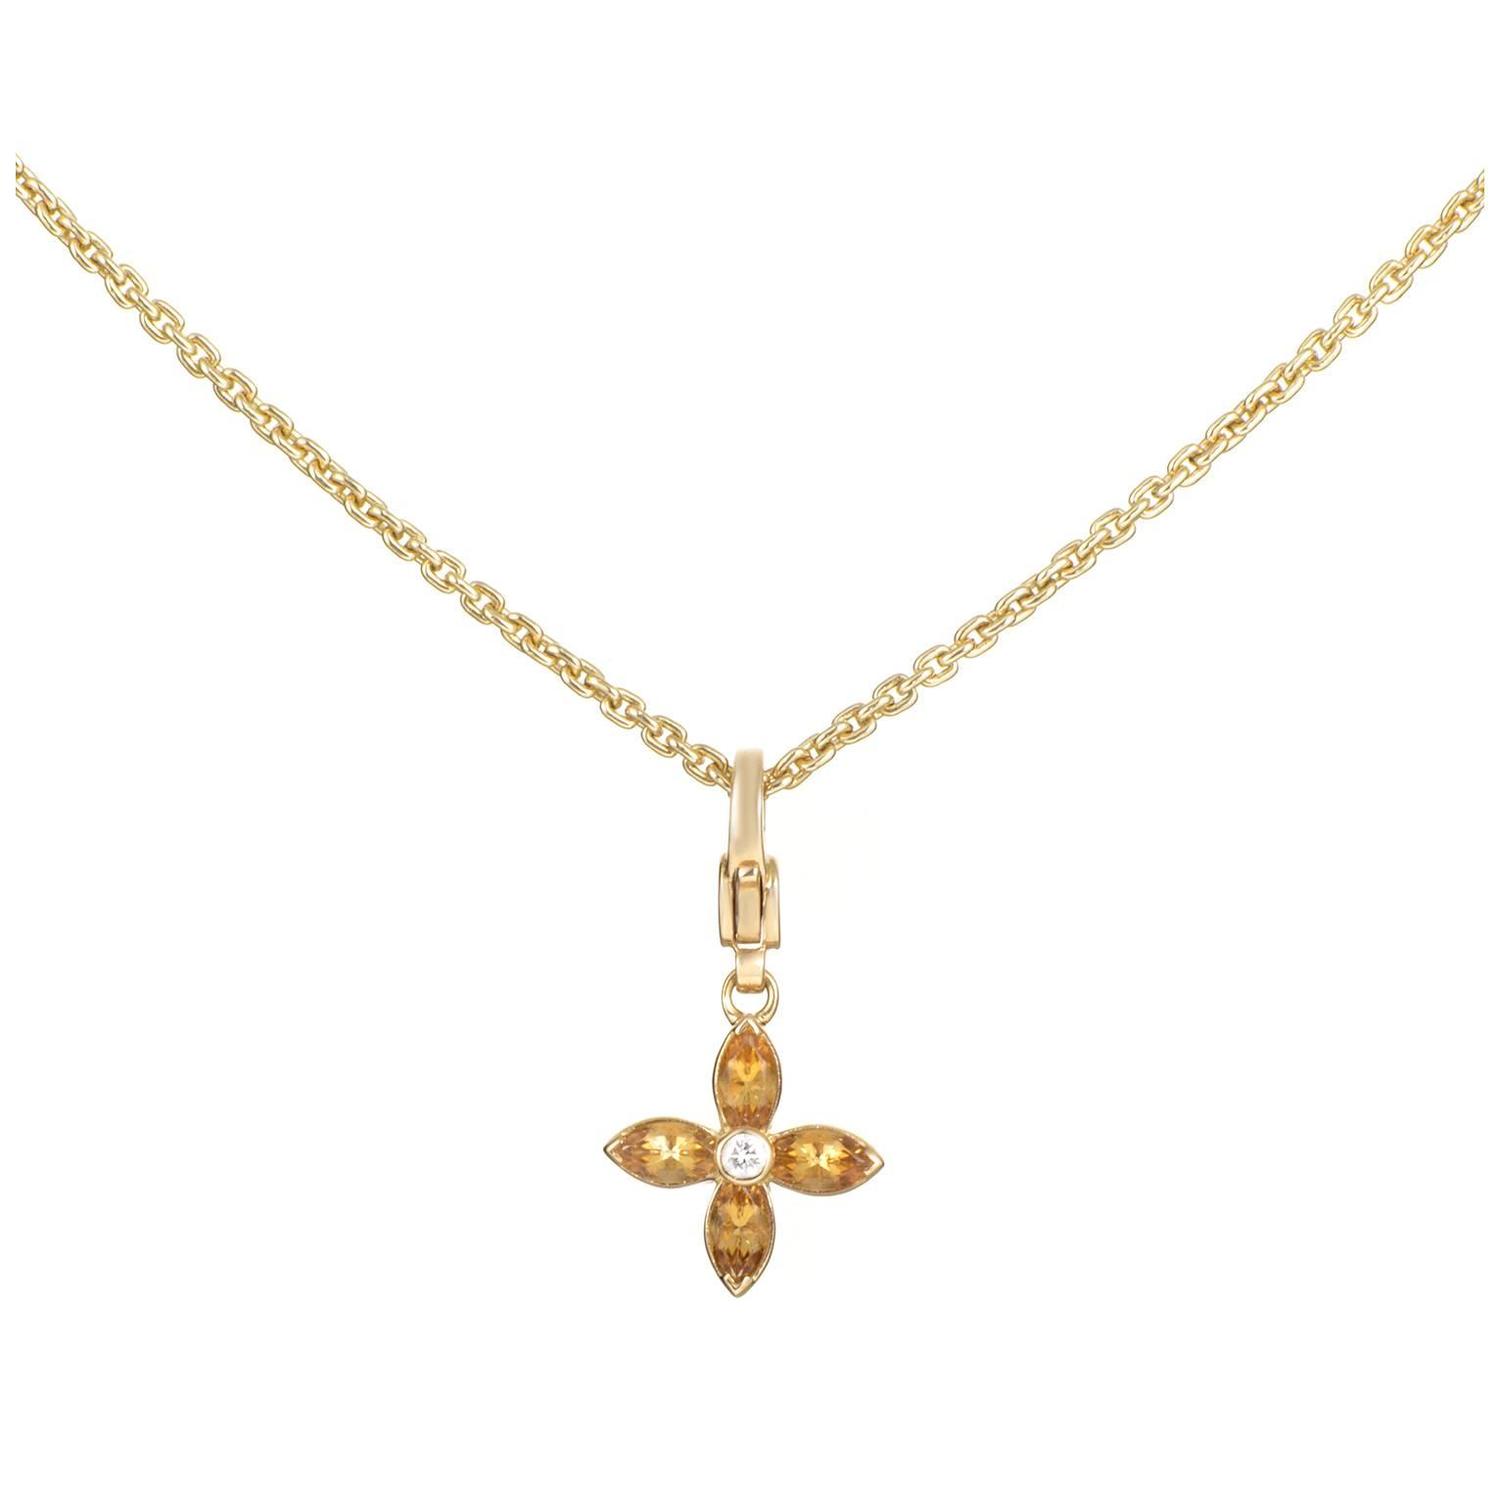 Louis Vuitton Blossom Necklace - 6 For Sale on 1stDibs  lv necklace blossom,  louis vuitton idylle blossom necklace, louis vuitton blossom necklace price